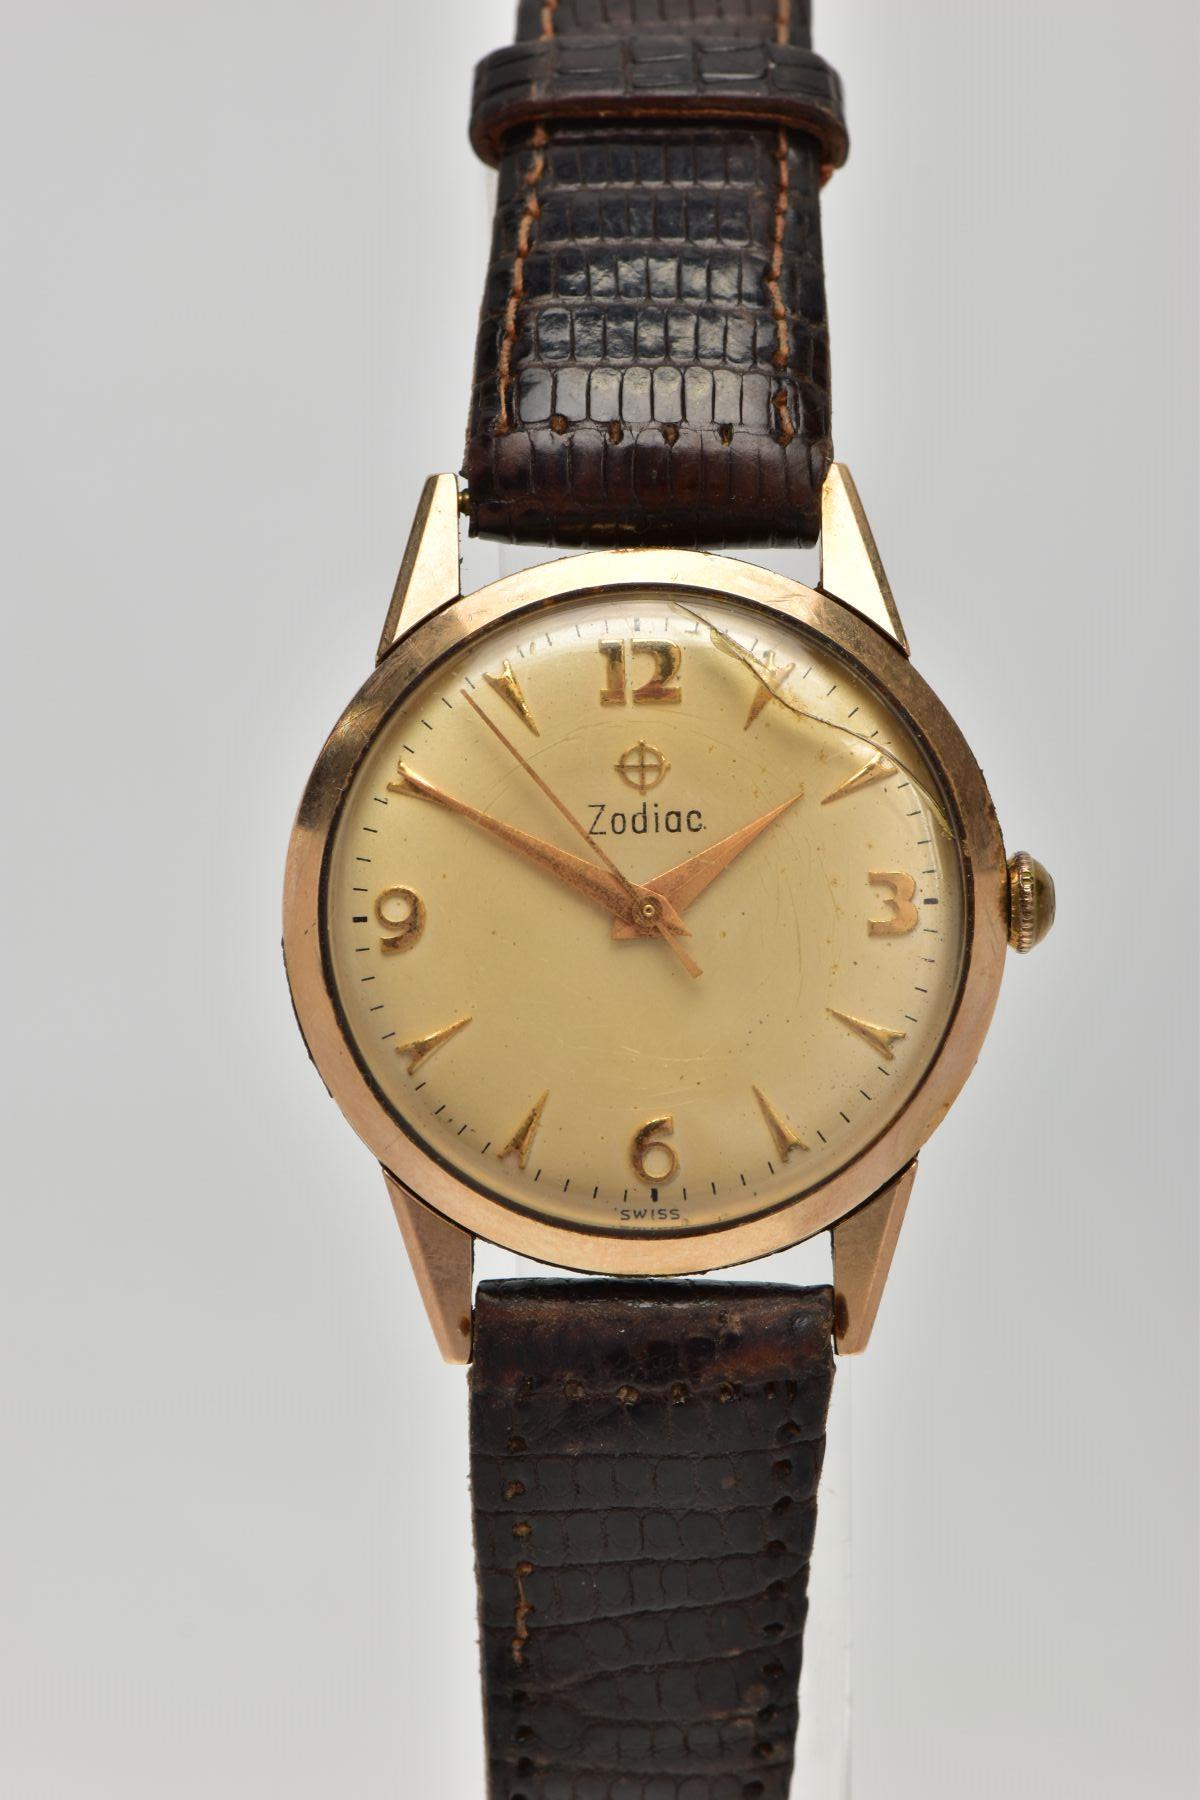 A 9CT GOLD 'ZODIAC' WRISTWATCH, hand wound movement (non-running), round gold tone dial signed '